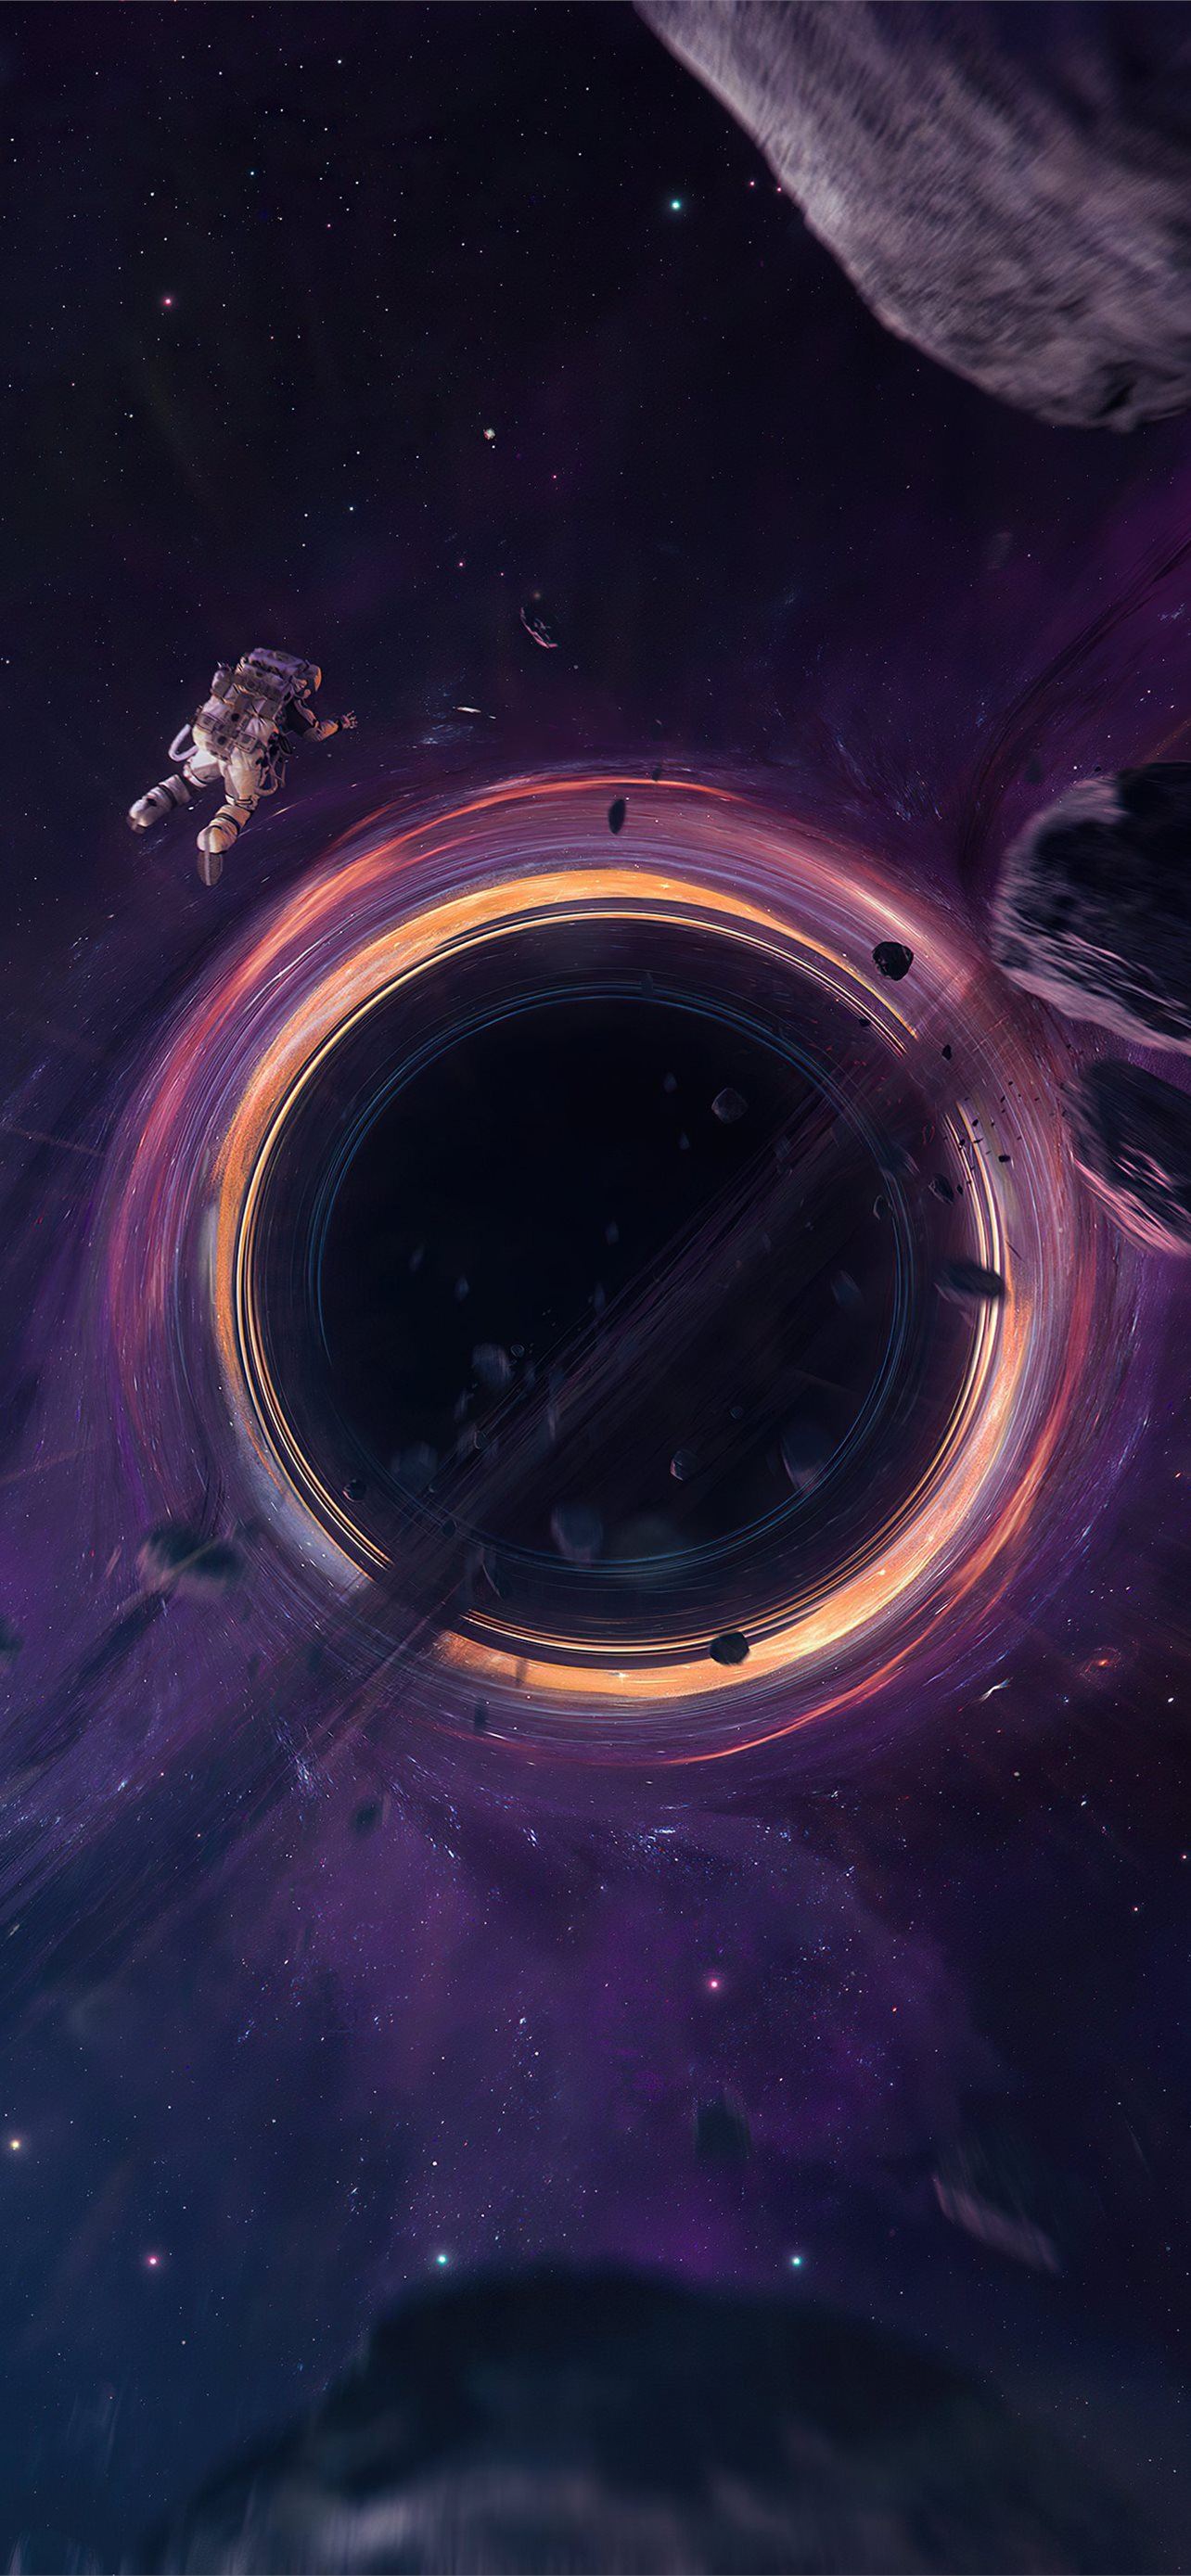 Black hole around asteroids and planets 5k Ultra H. iPhone Wallpaper Free Download